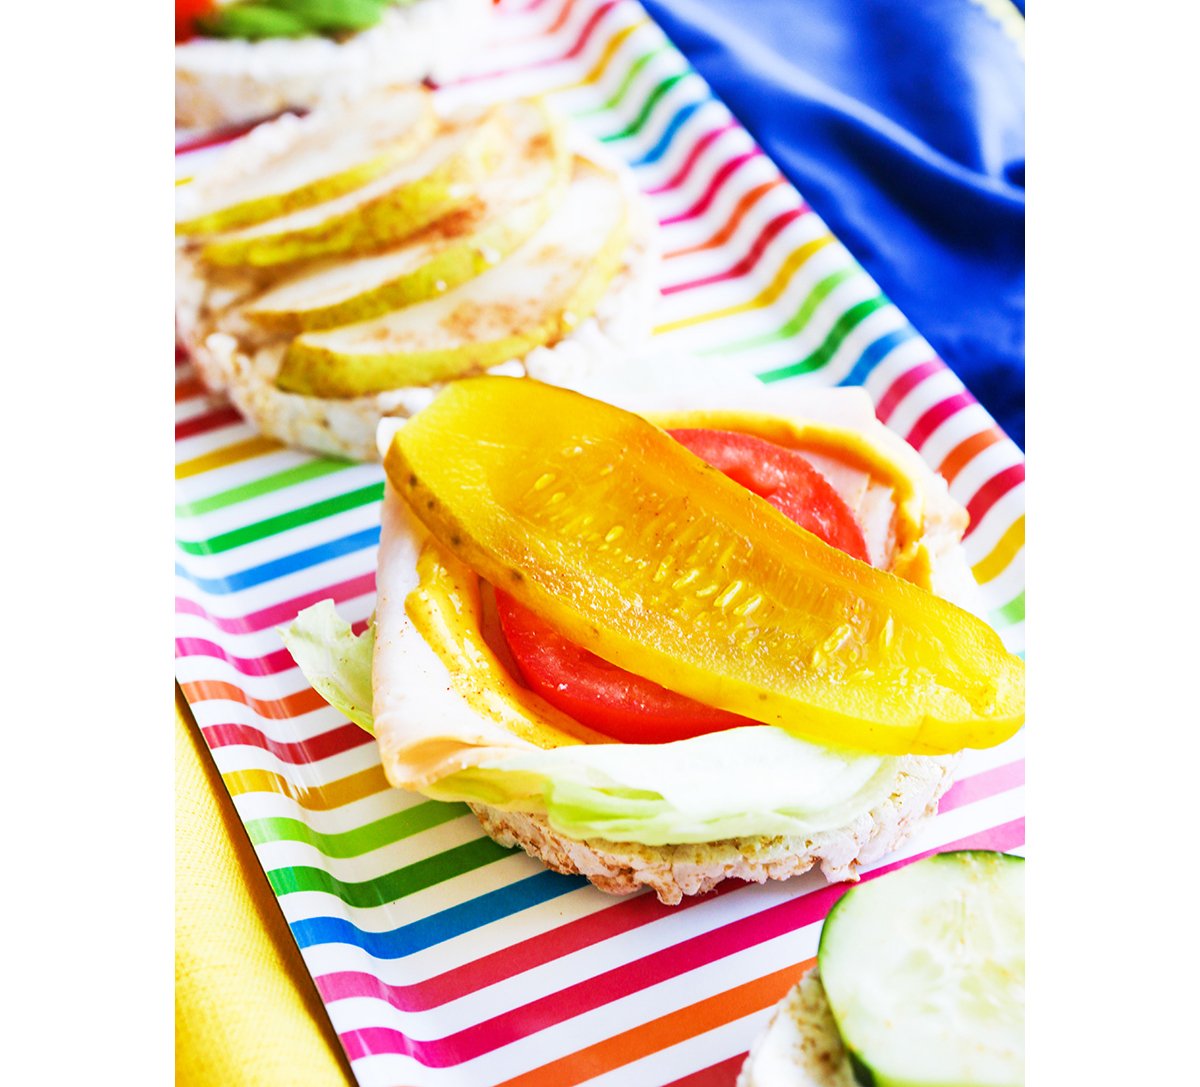 Rice cakes on a platter with different toppings such as turkey, tomato and pickles.